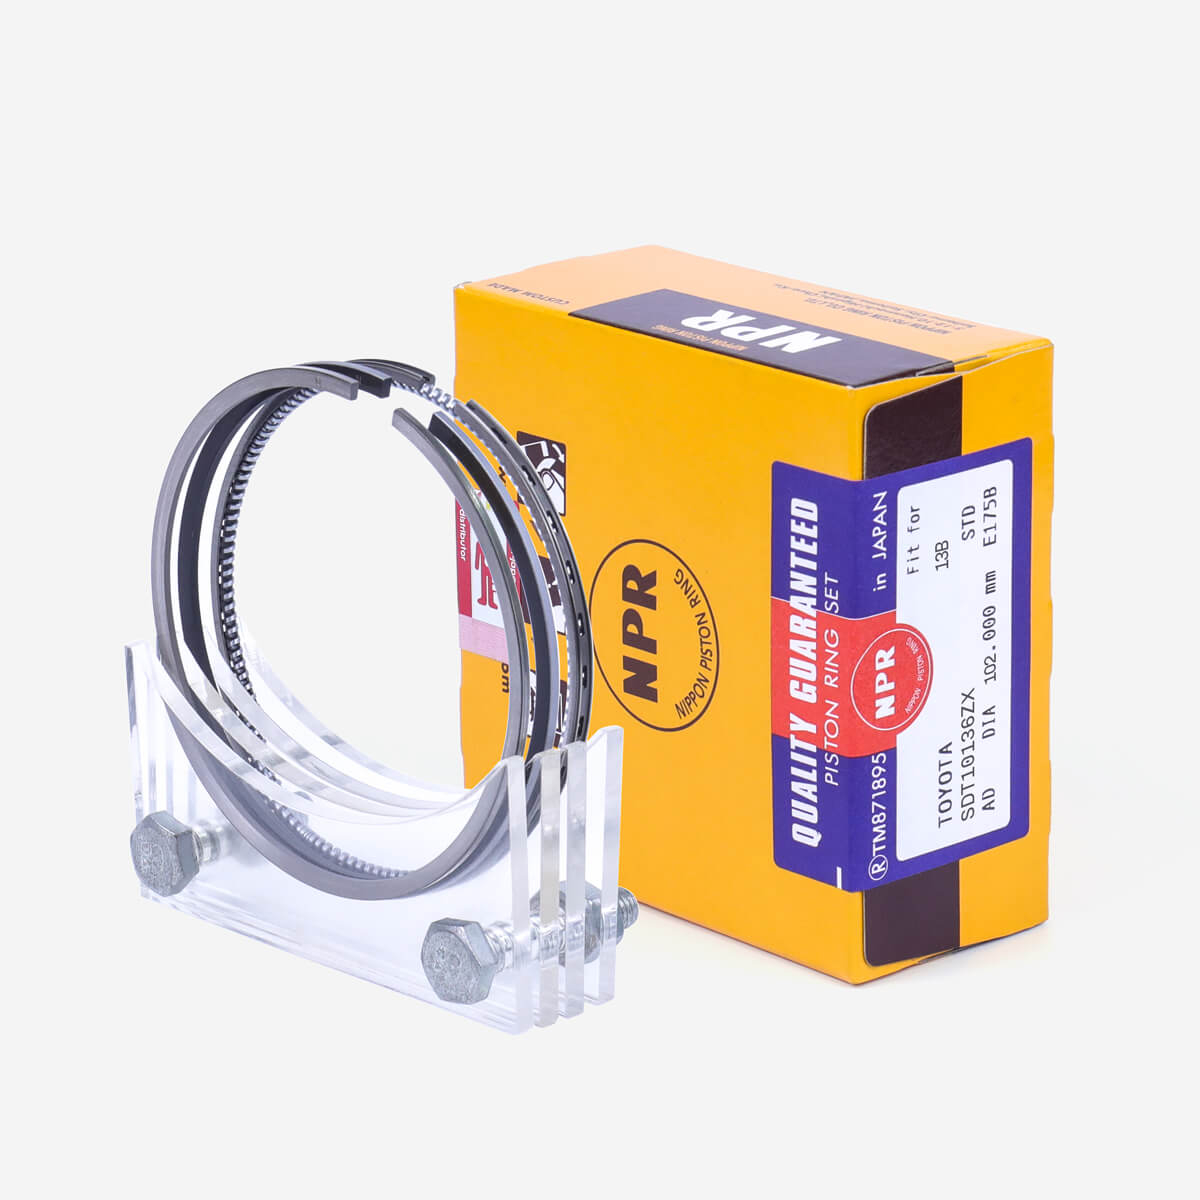 NPR 13B Engine Piston Rings OEM:SDT10136ZX for TOYOTA |TospinoMall 